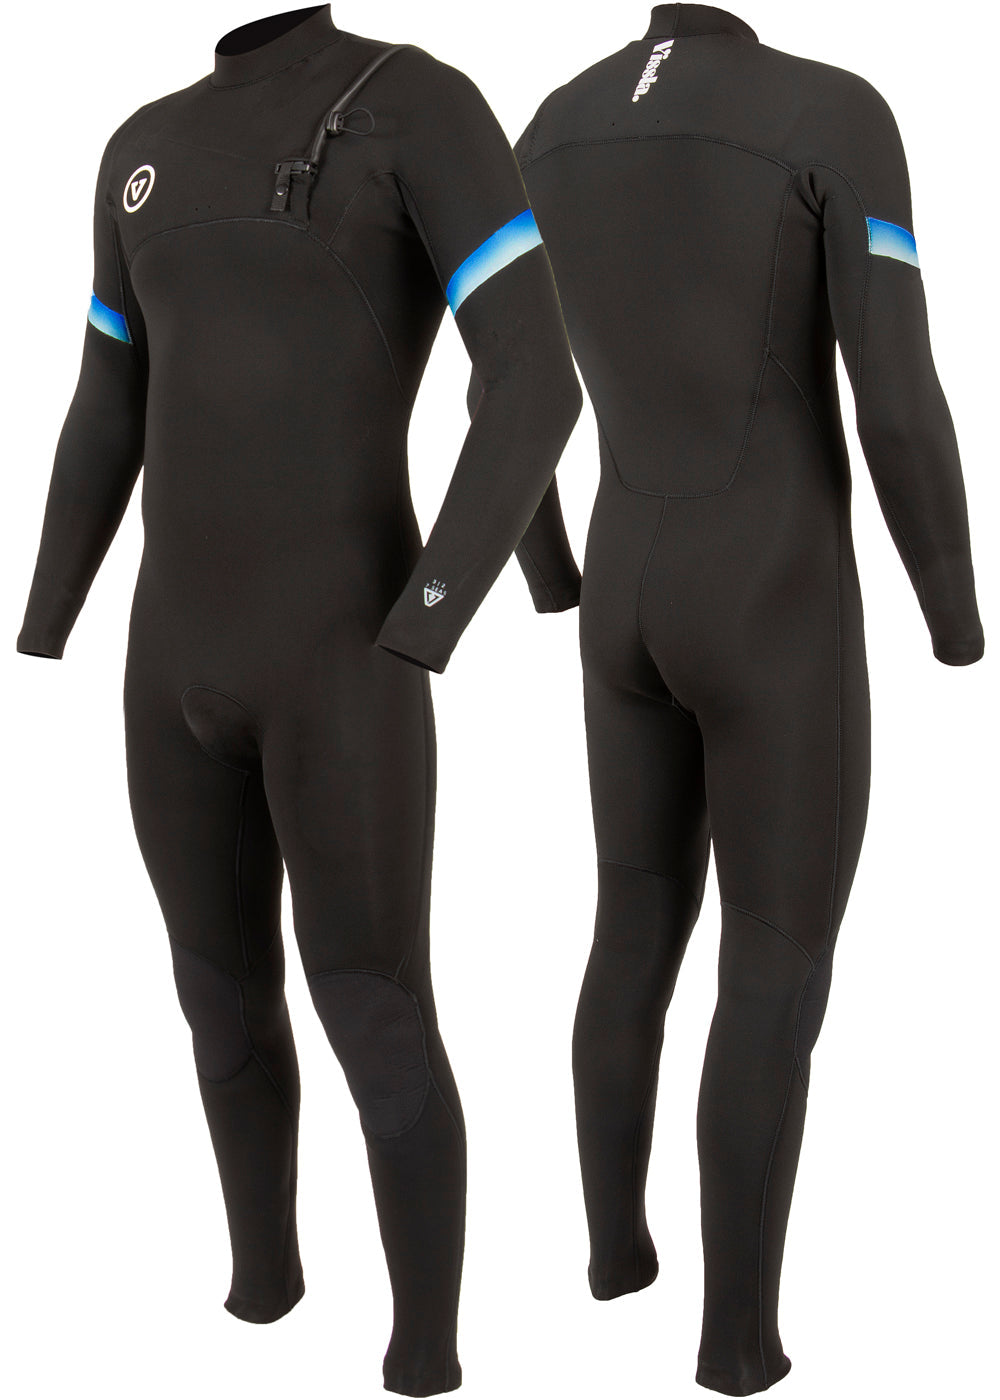 How to Put on a Chest zip wetsuit 